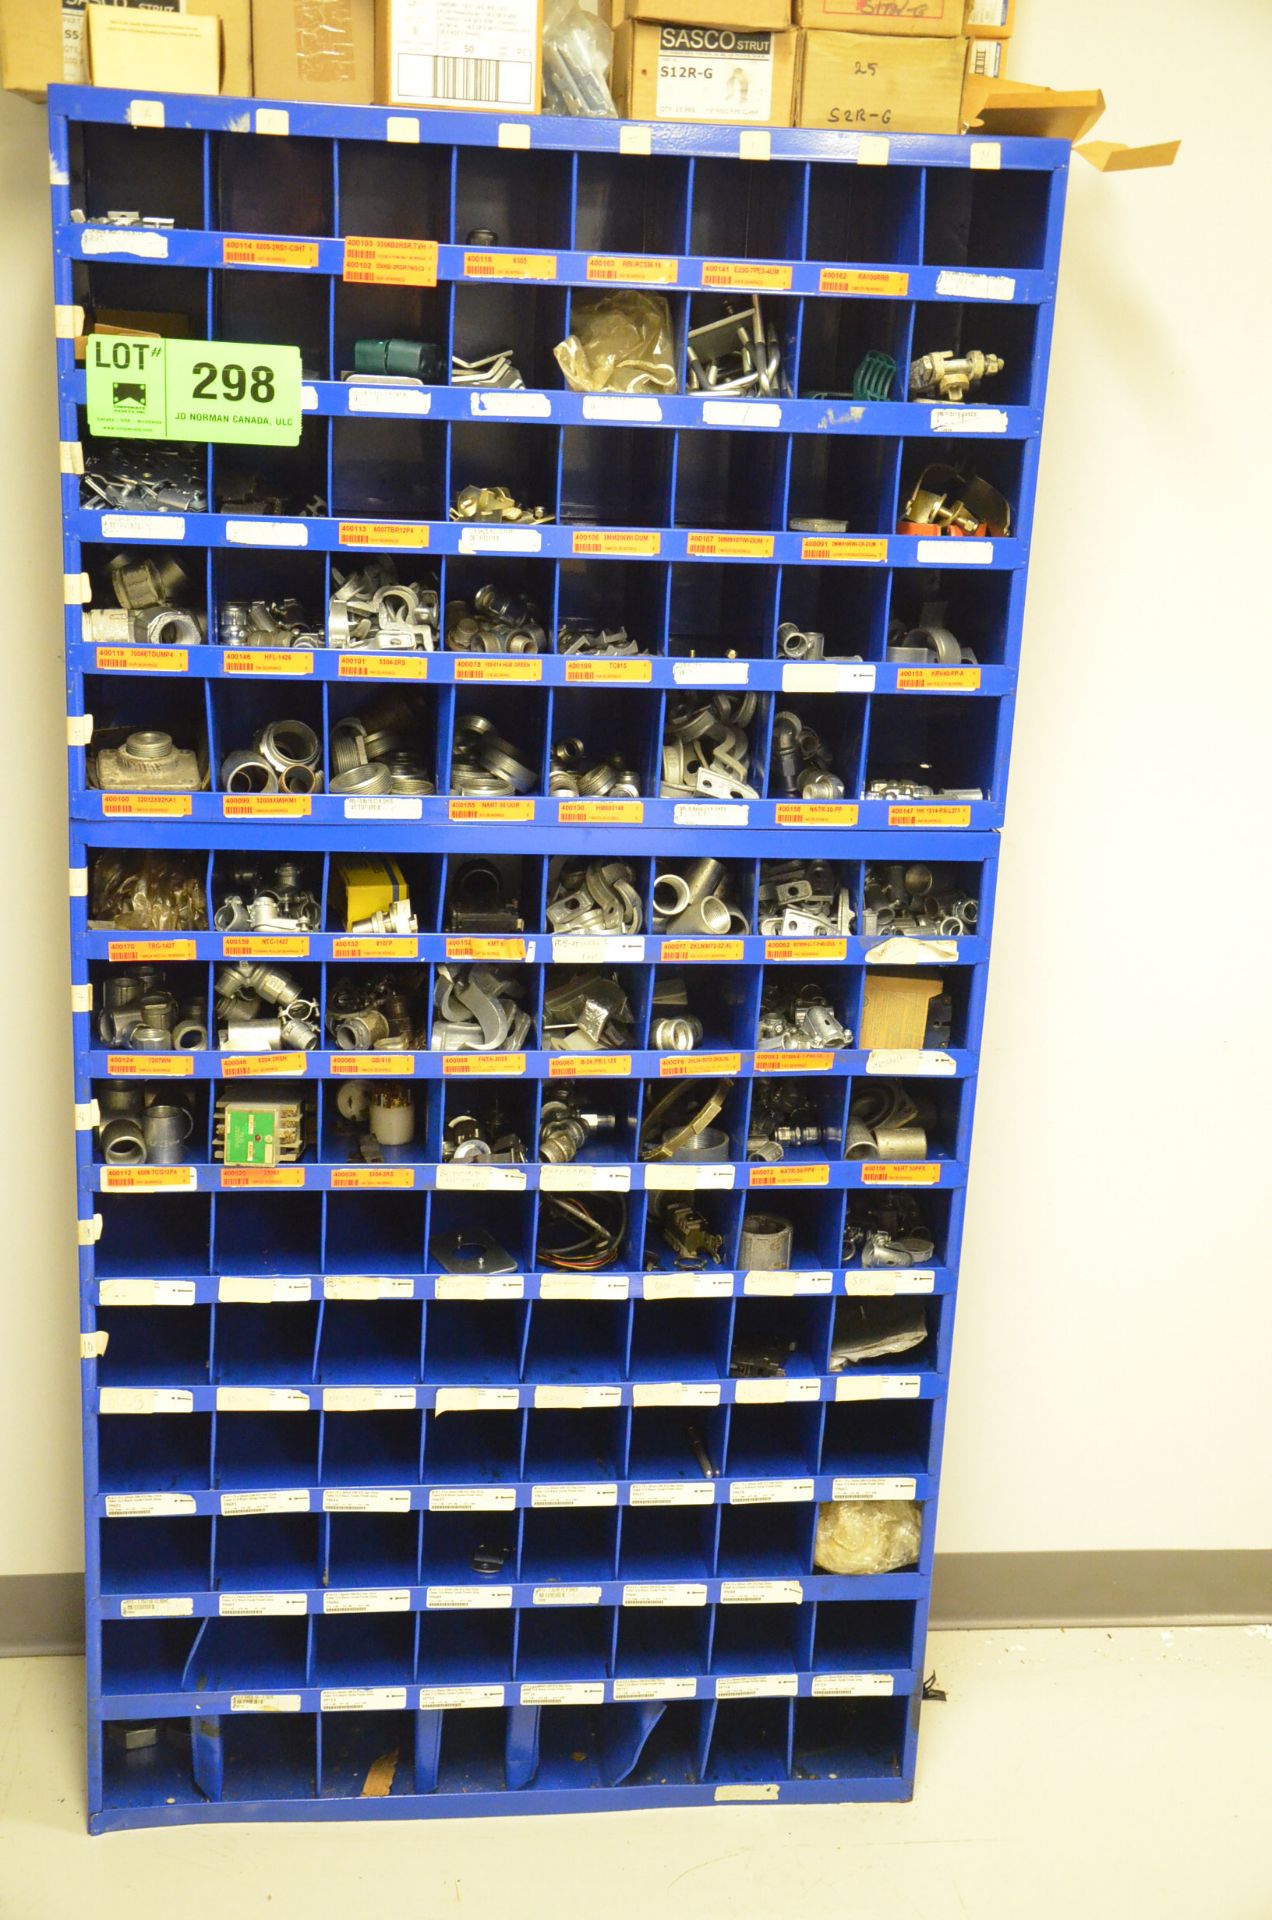 LOT/ FASTENAL PIGEON HOLE INDEX CABINET WITH ELECTRICAL HARDWARE